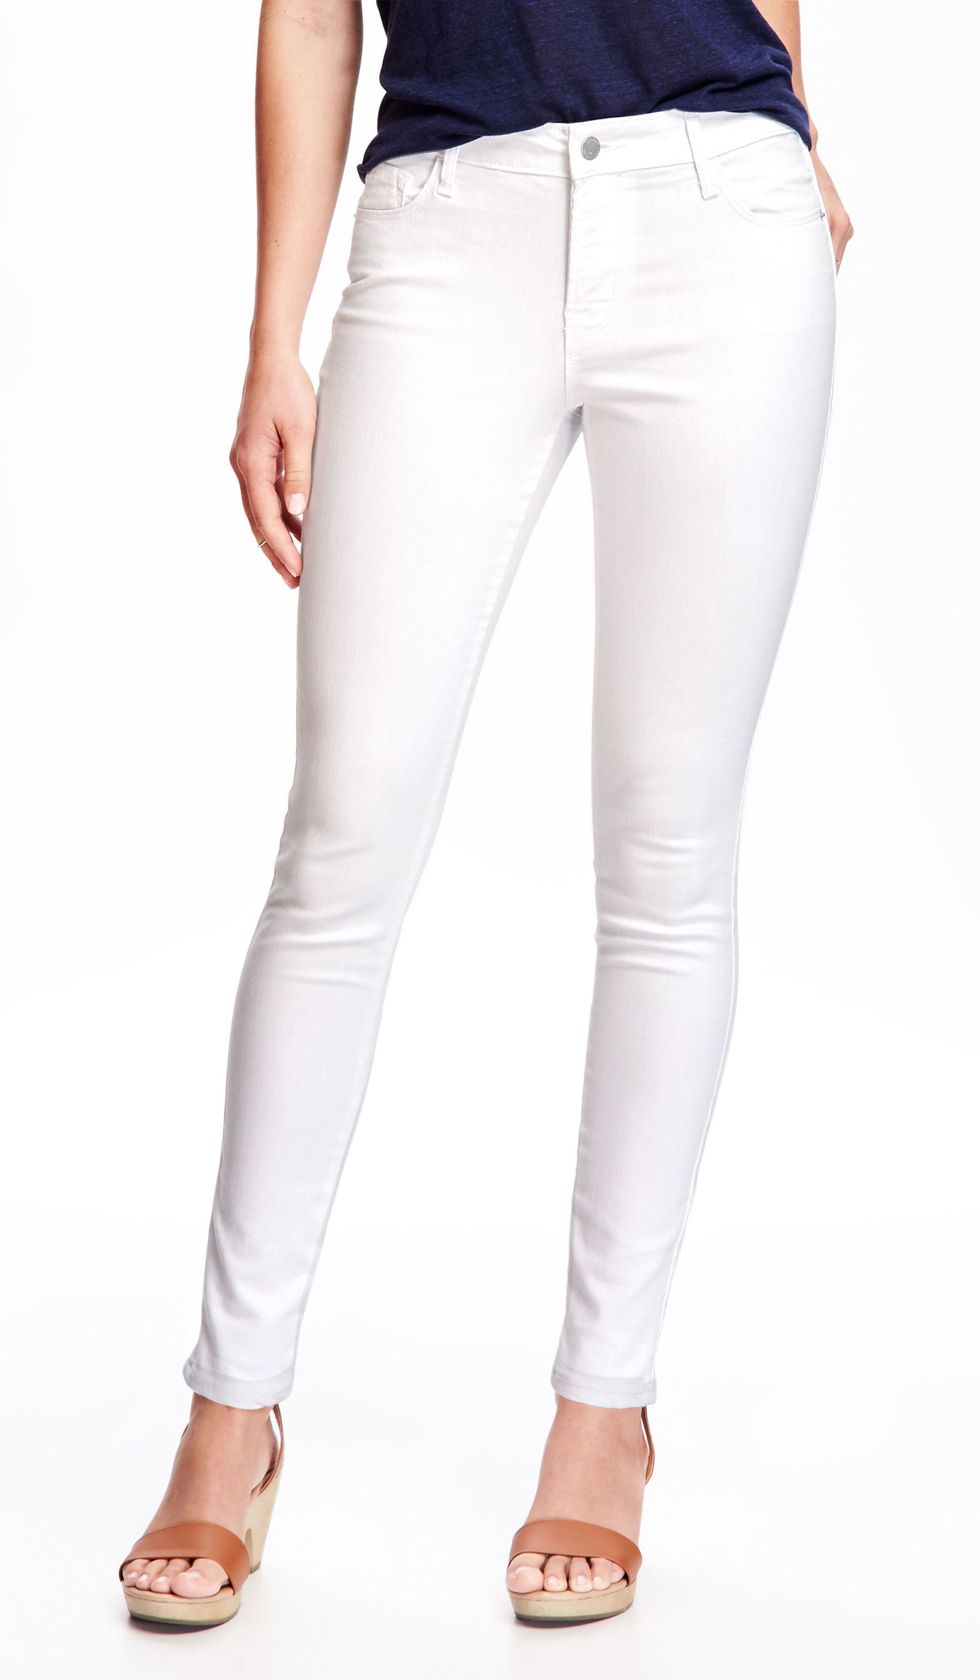 Old Navy stain resistant white jeans